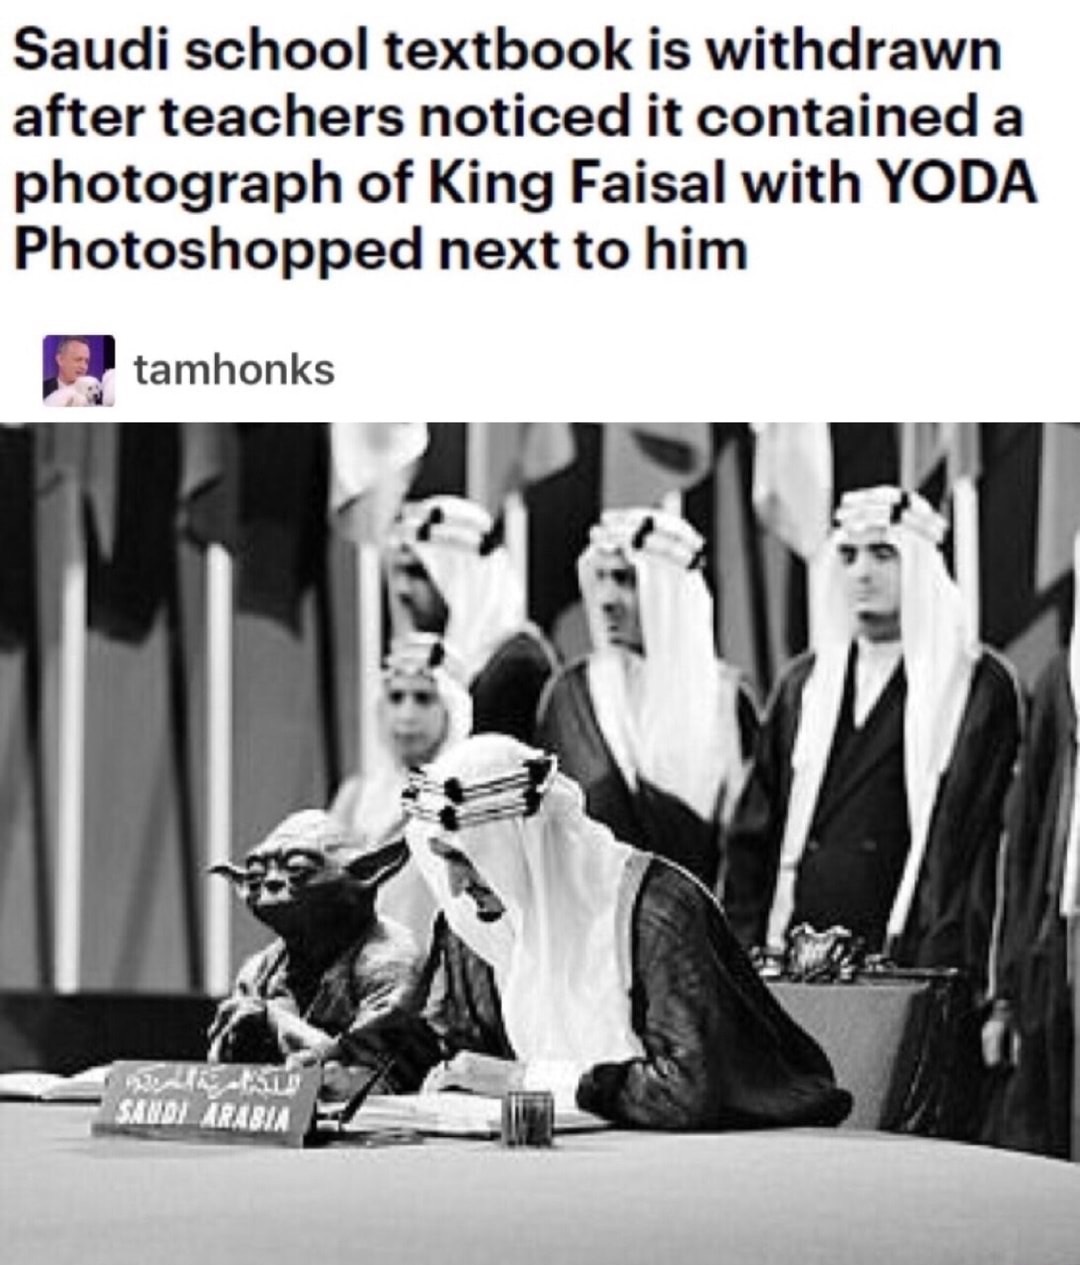 meme stream - yoda saudi arabia textbook - Saudi school textbook is withdrawn after teachers noticed it contained a photograph of King Faisal with Yoda Photoshopped next to him tamhonks Pers Sandi Arabia